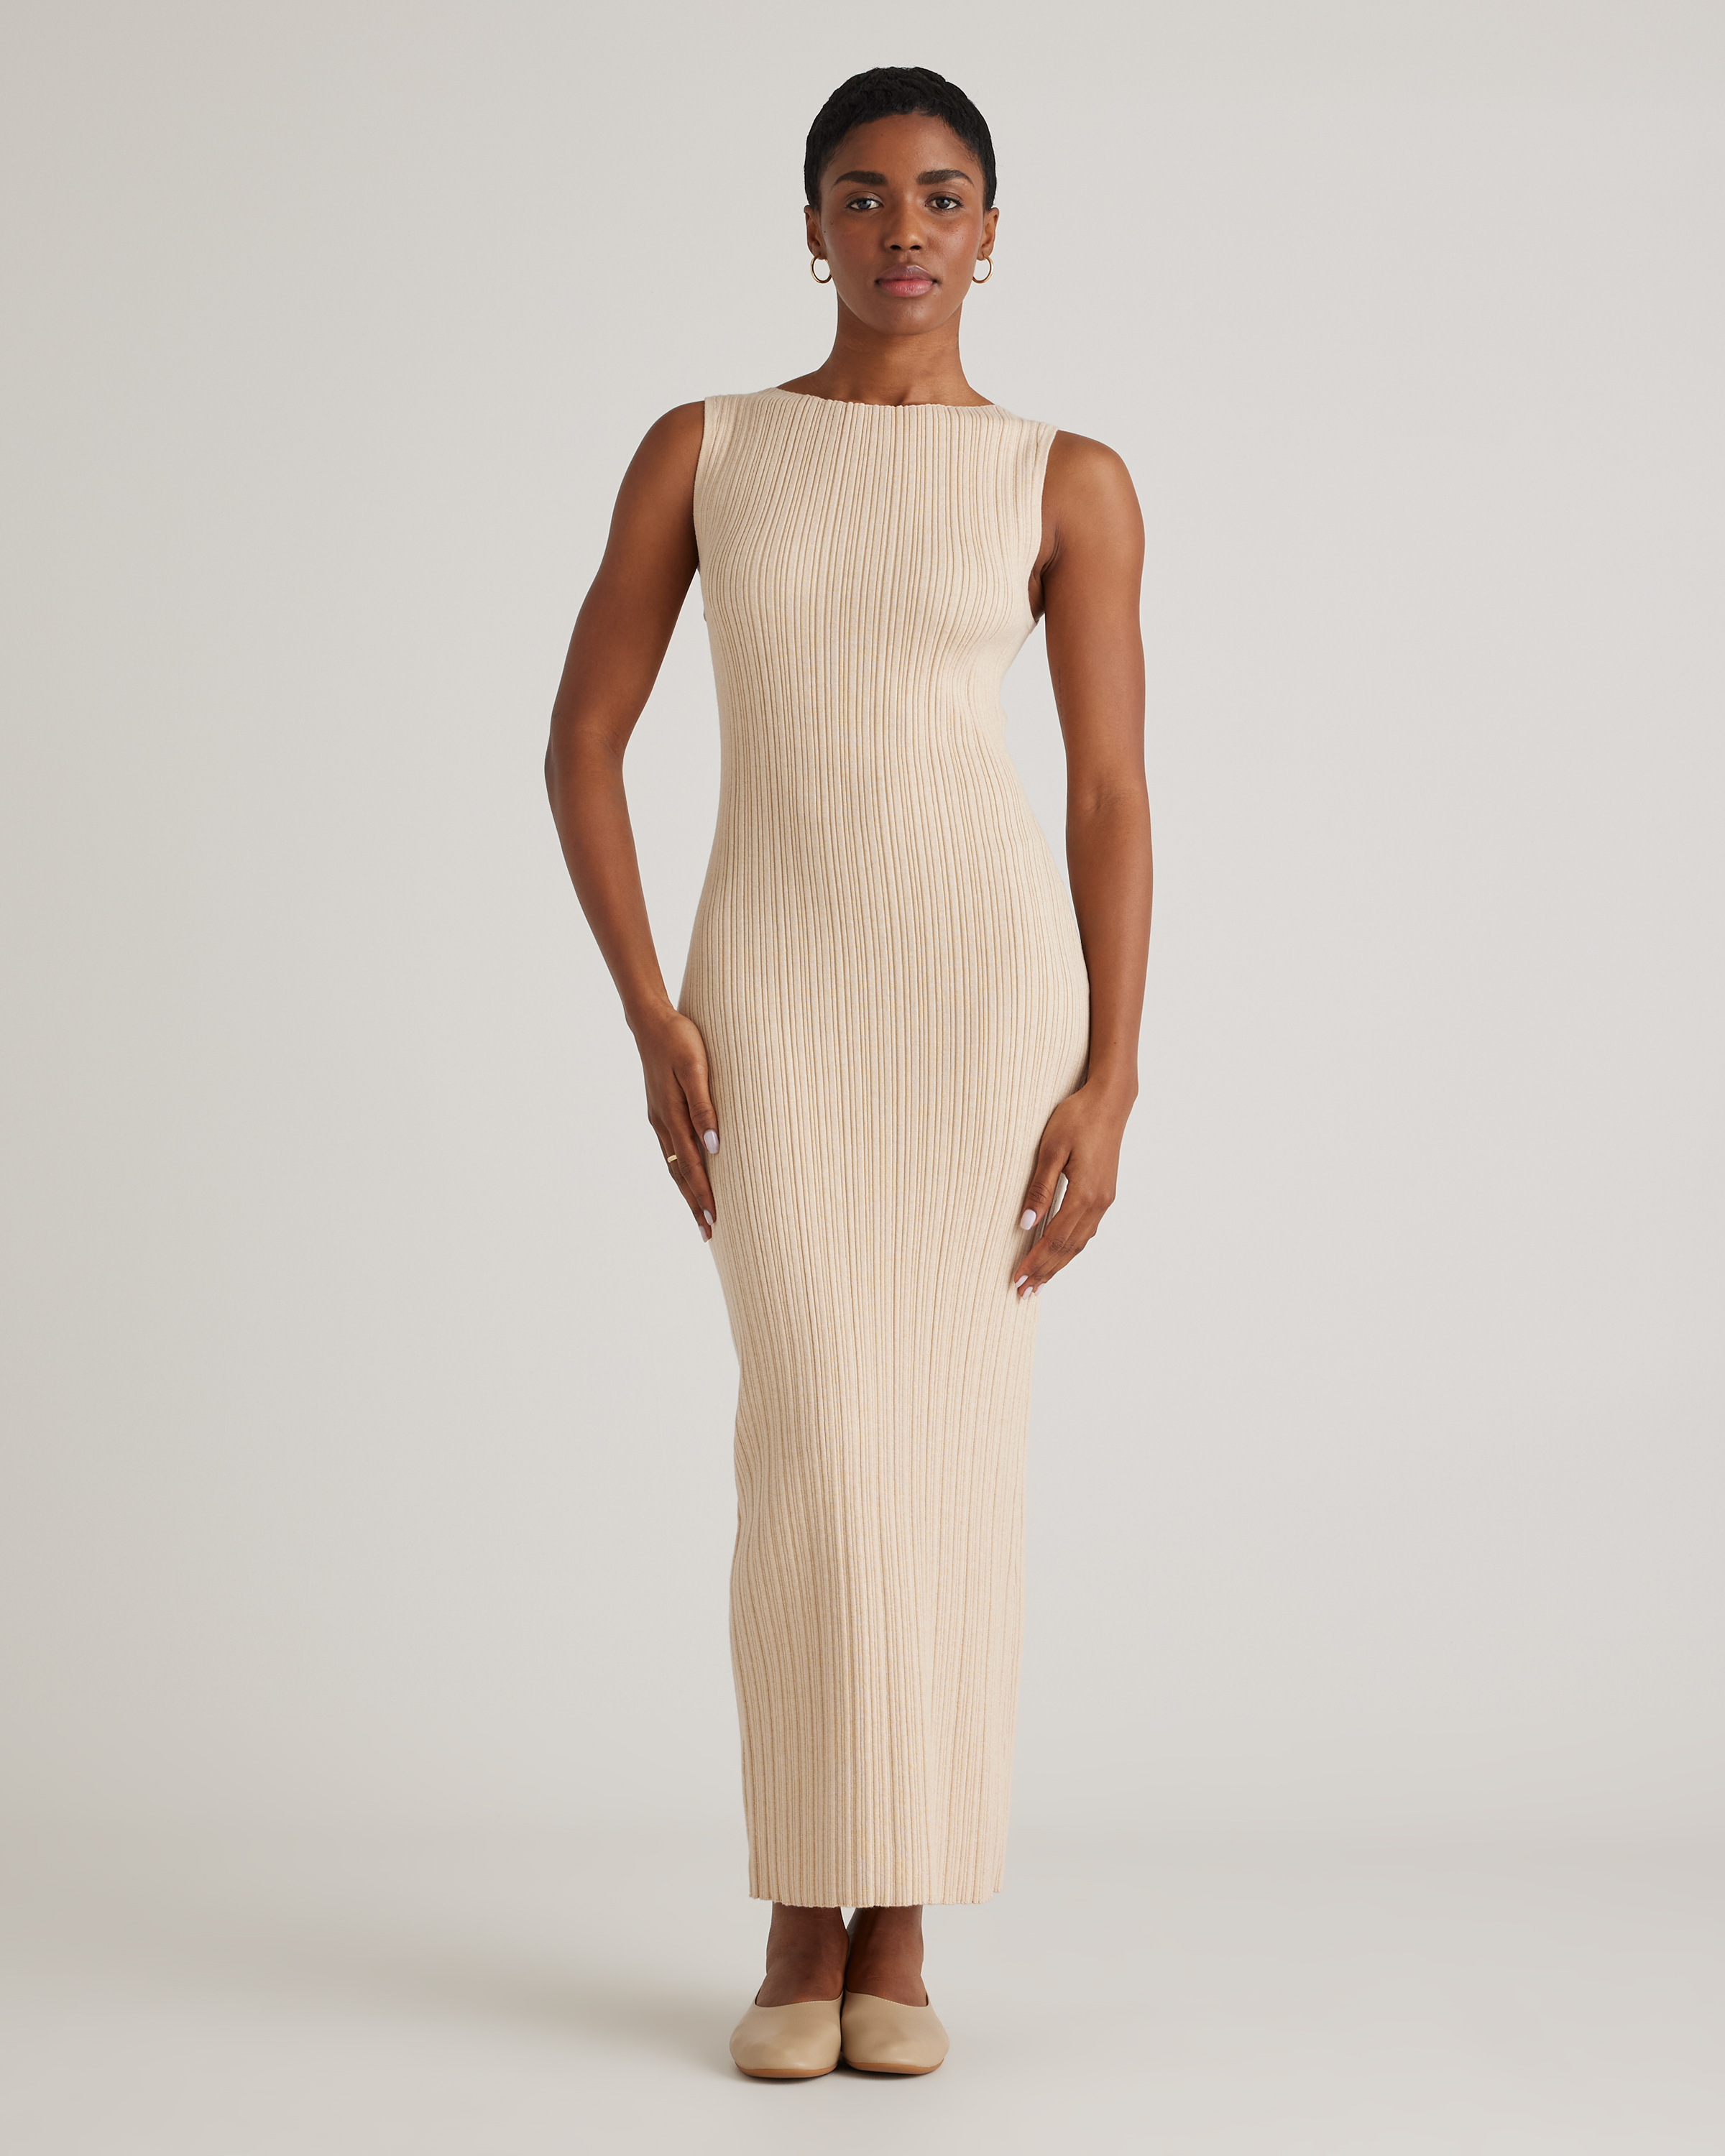 Quince Women's Cotton Cashmere Ribbed Sleeveless Midi Dress In Heather Oatmeal